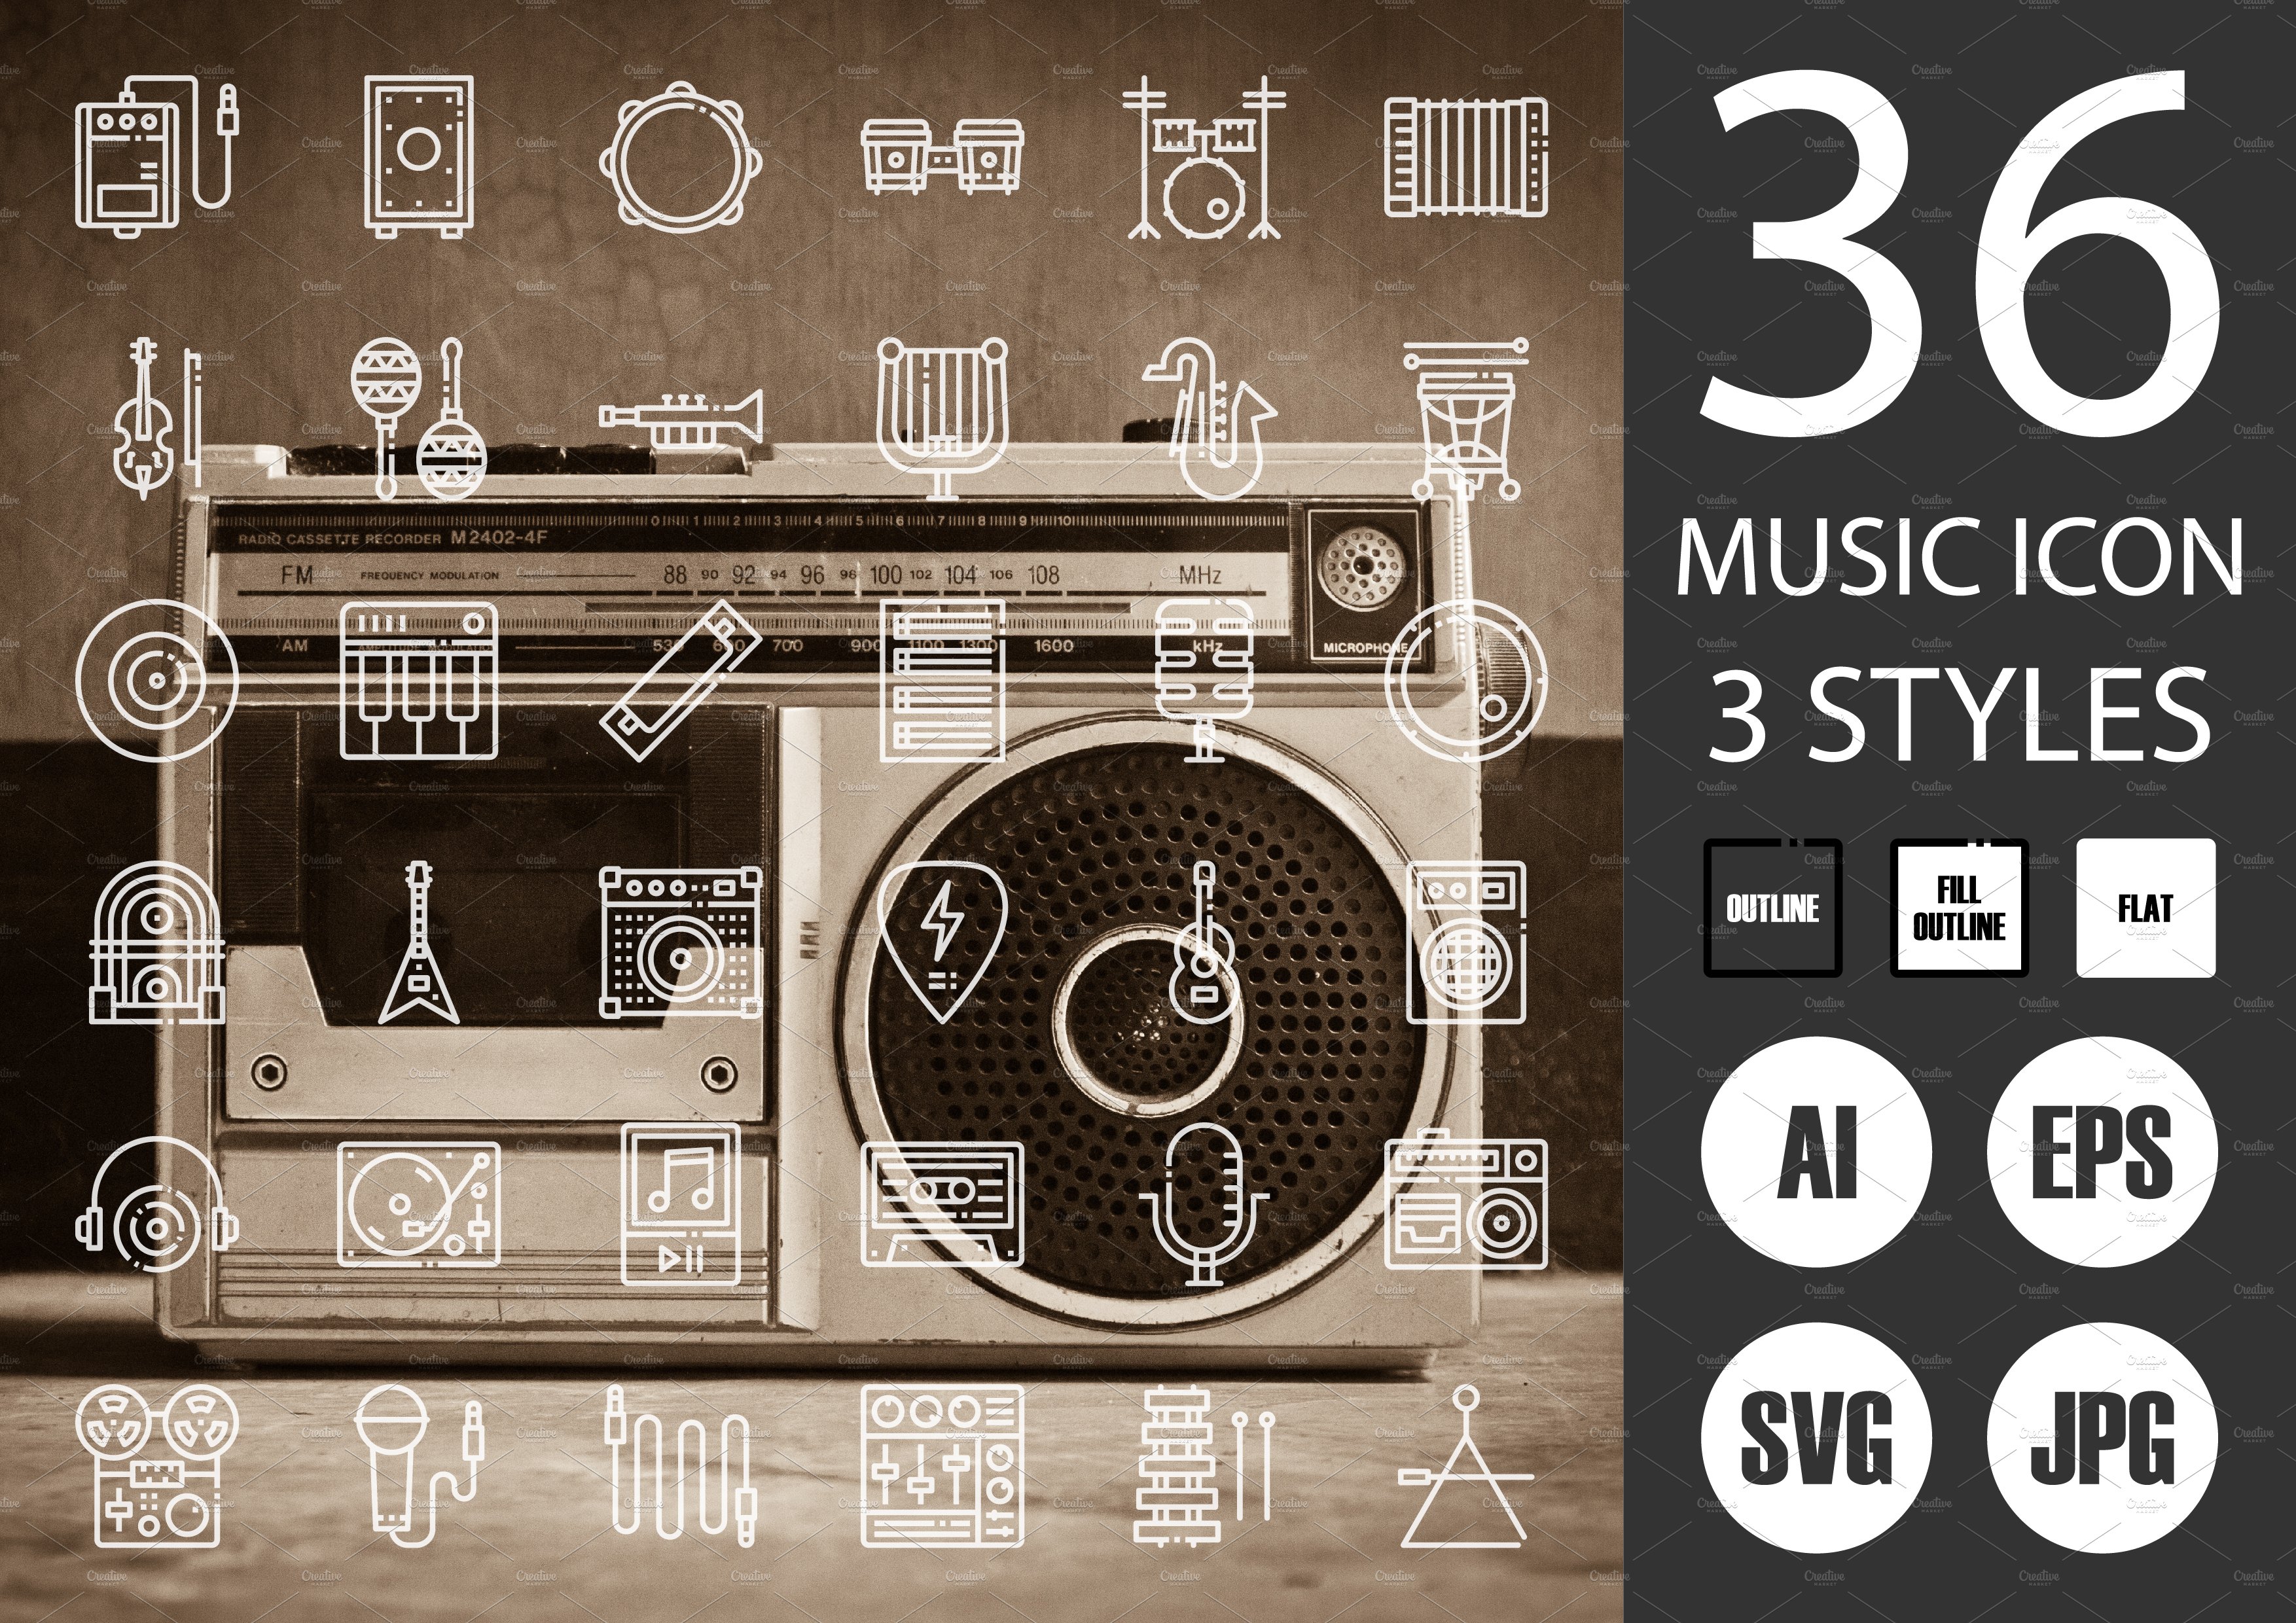 Music Instrument Icons cover image.